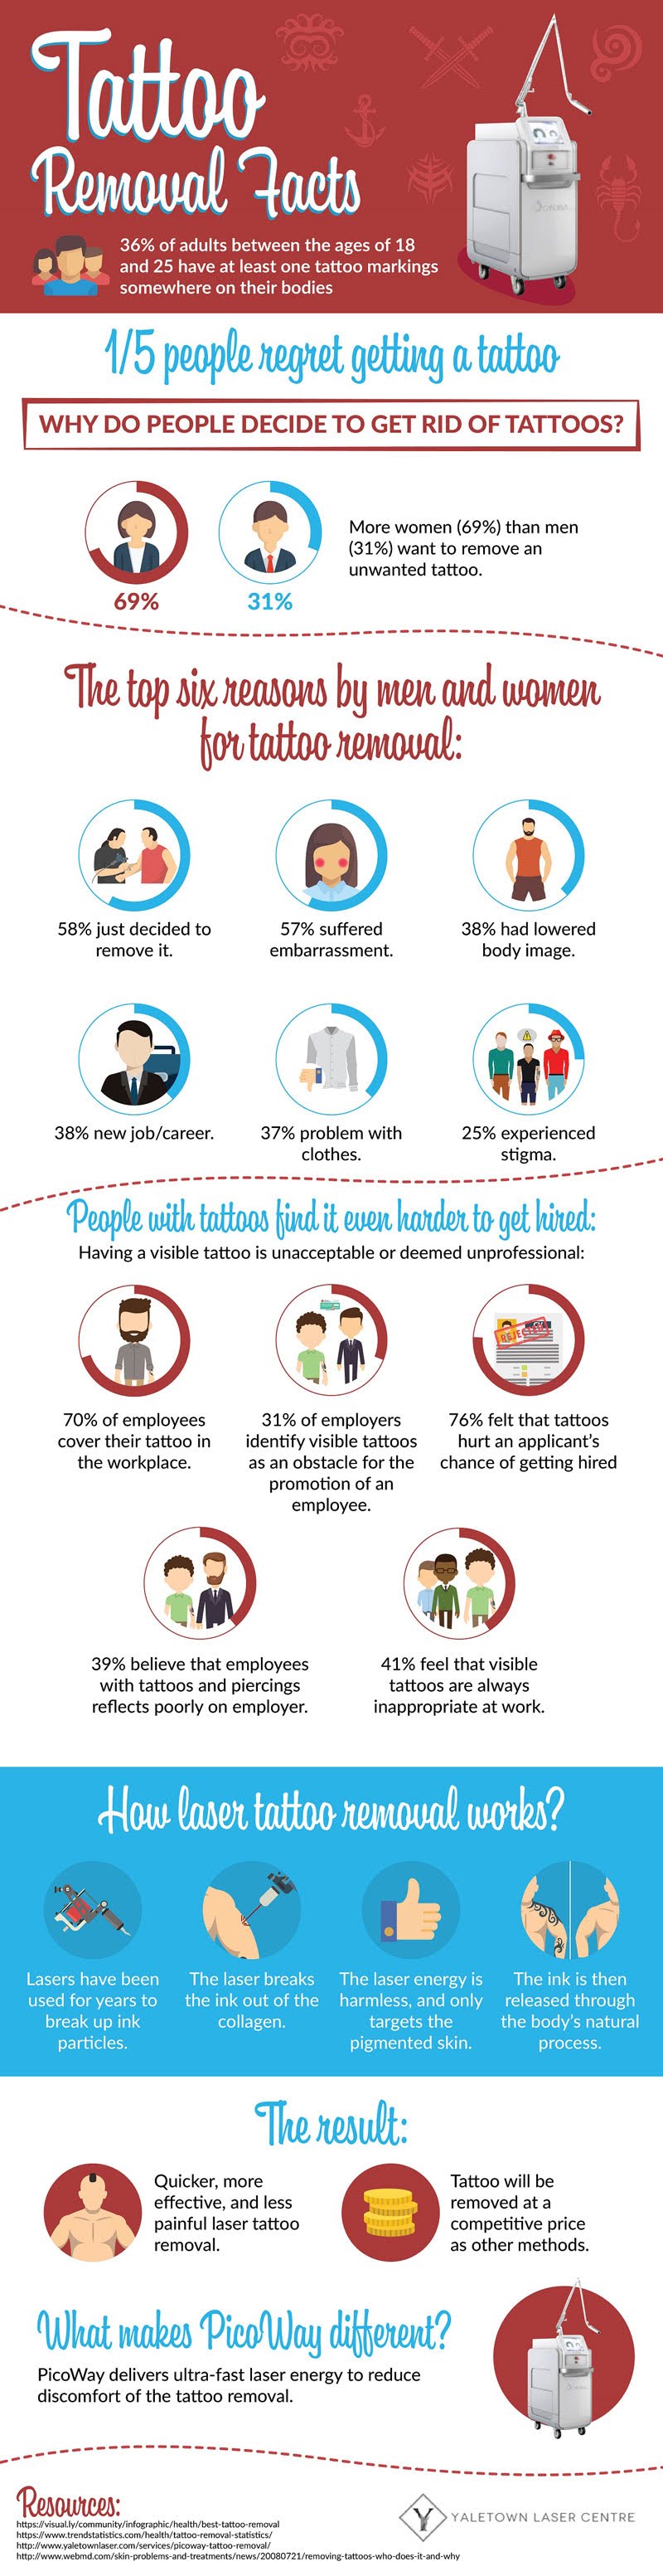 Tattoo Removal Facts #Infographic